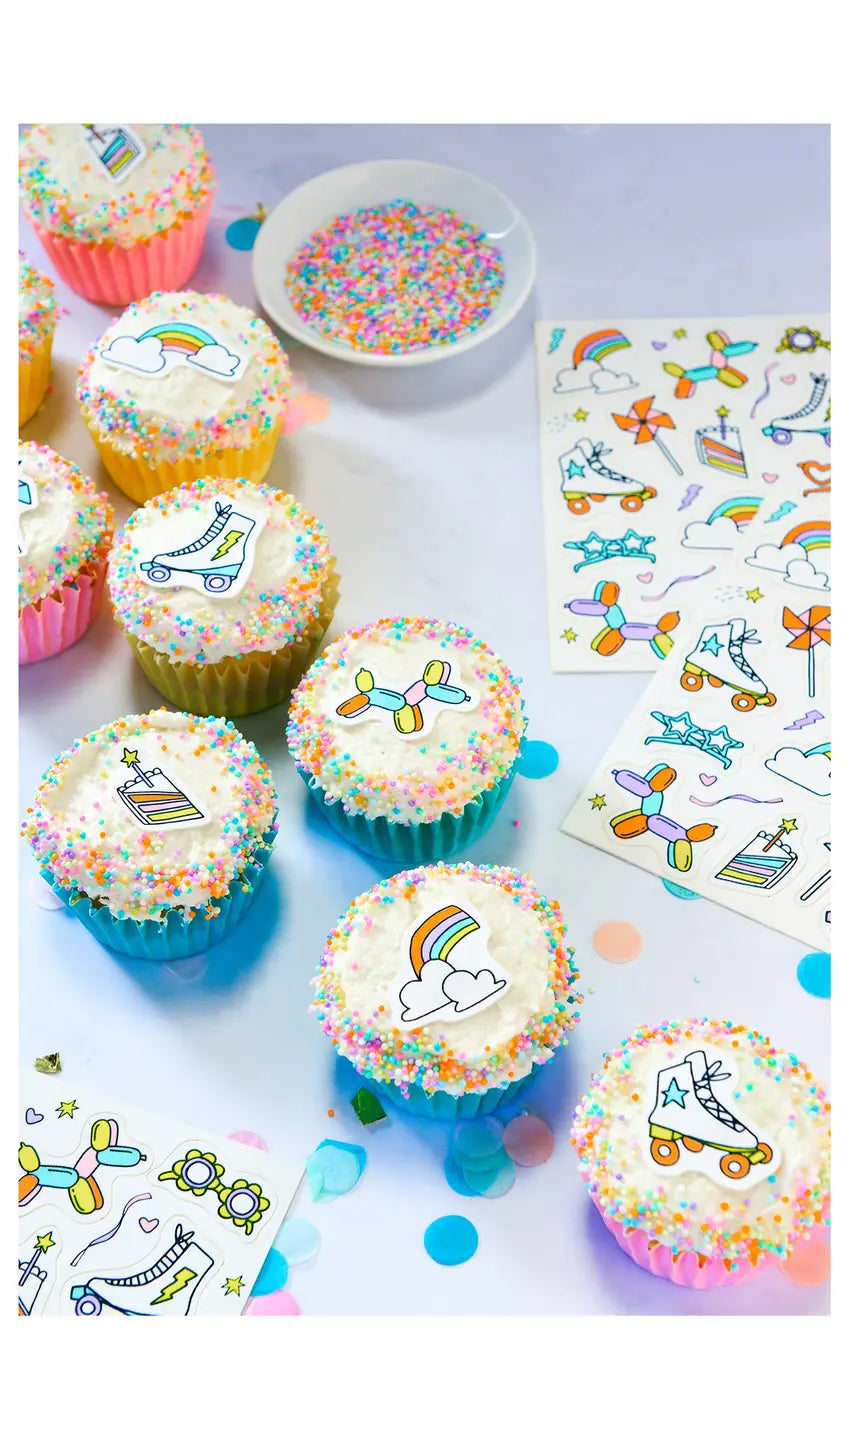 Edible Stickers for Baking & Food Crafts – Rollerskate Party